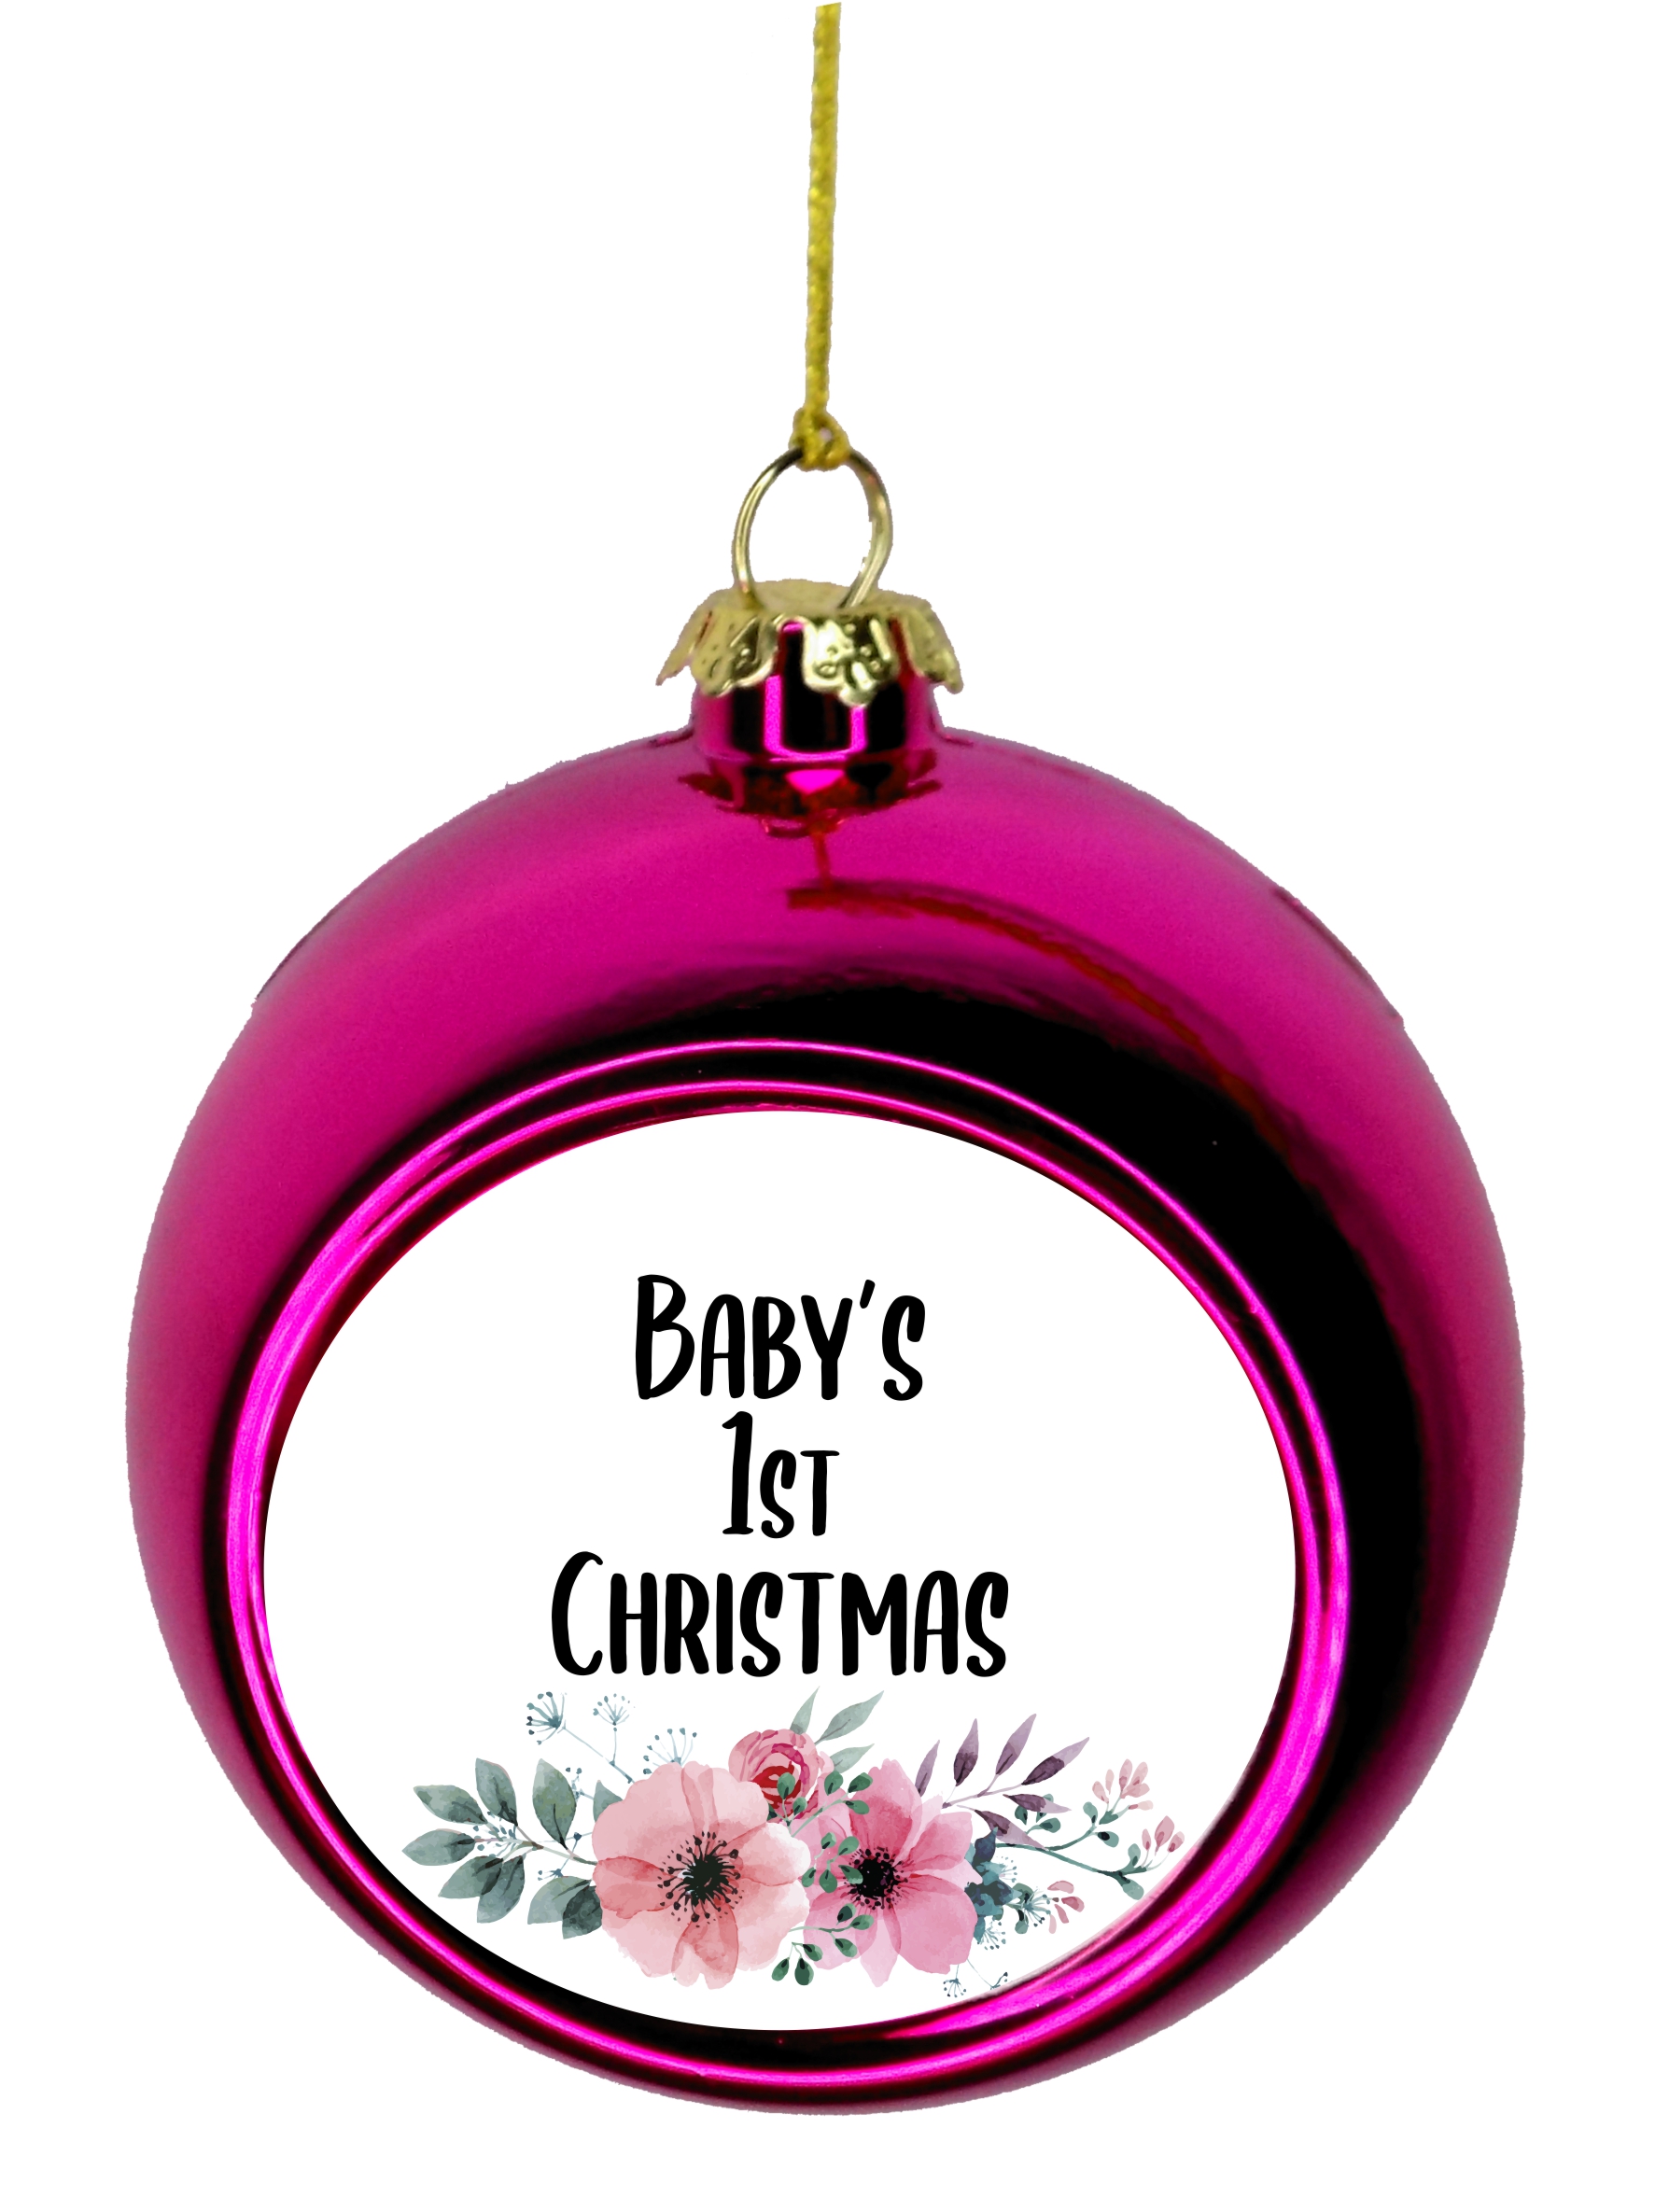 Baby 1st Christmas Ornament New Baby First Year Ornament Babys First Christmas Xmas Ornament - Baby 1st Xmas Ornament Christmas DÃ©cor Pink Ball Ornaments - image 1 of 1